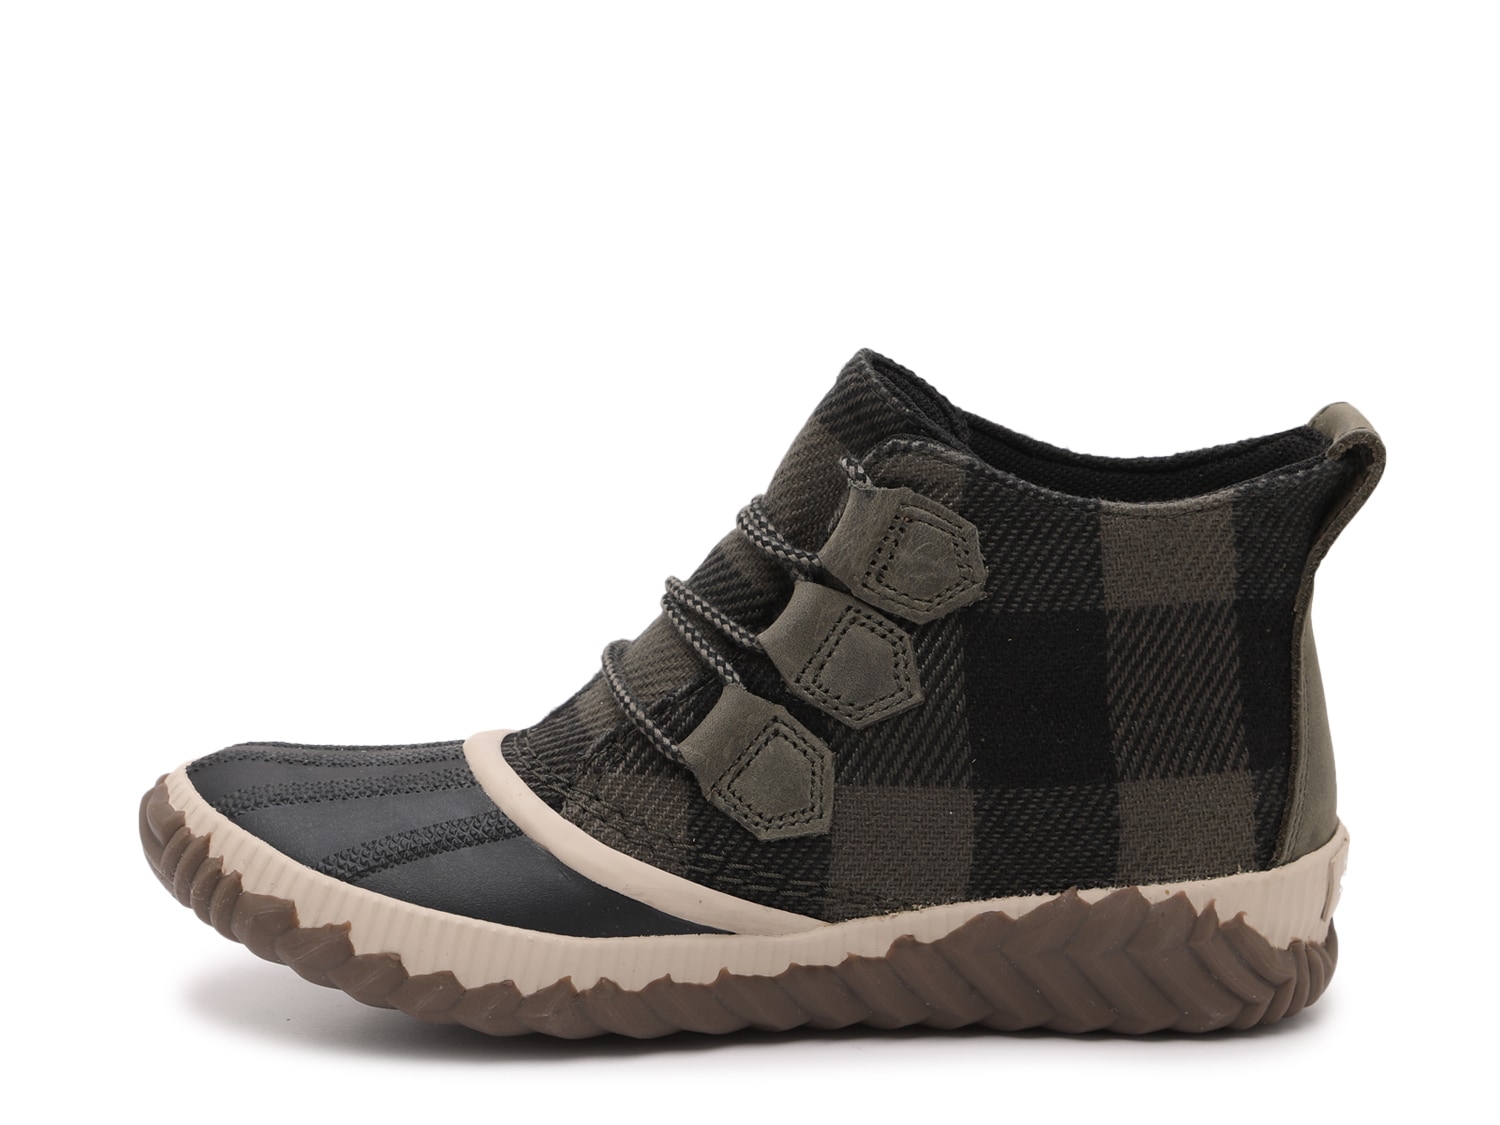 Sorel Out N About Plus Duck Boot | DSW